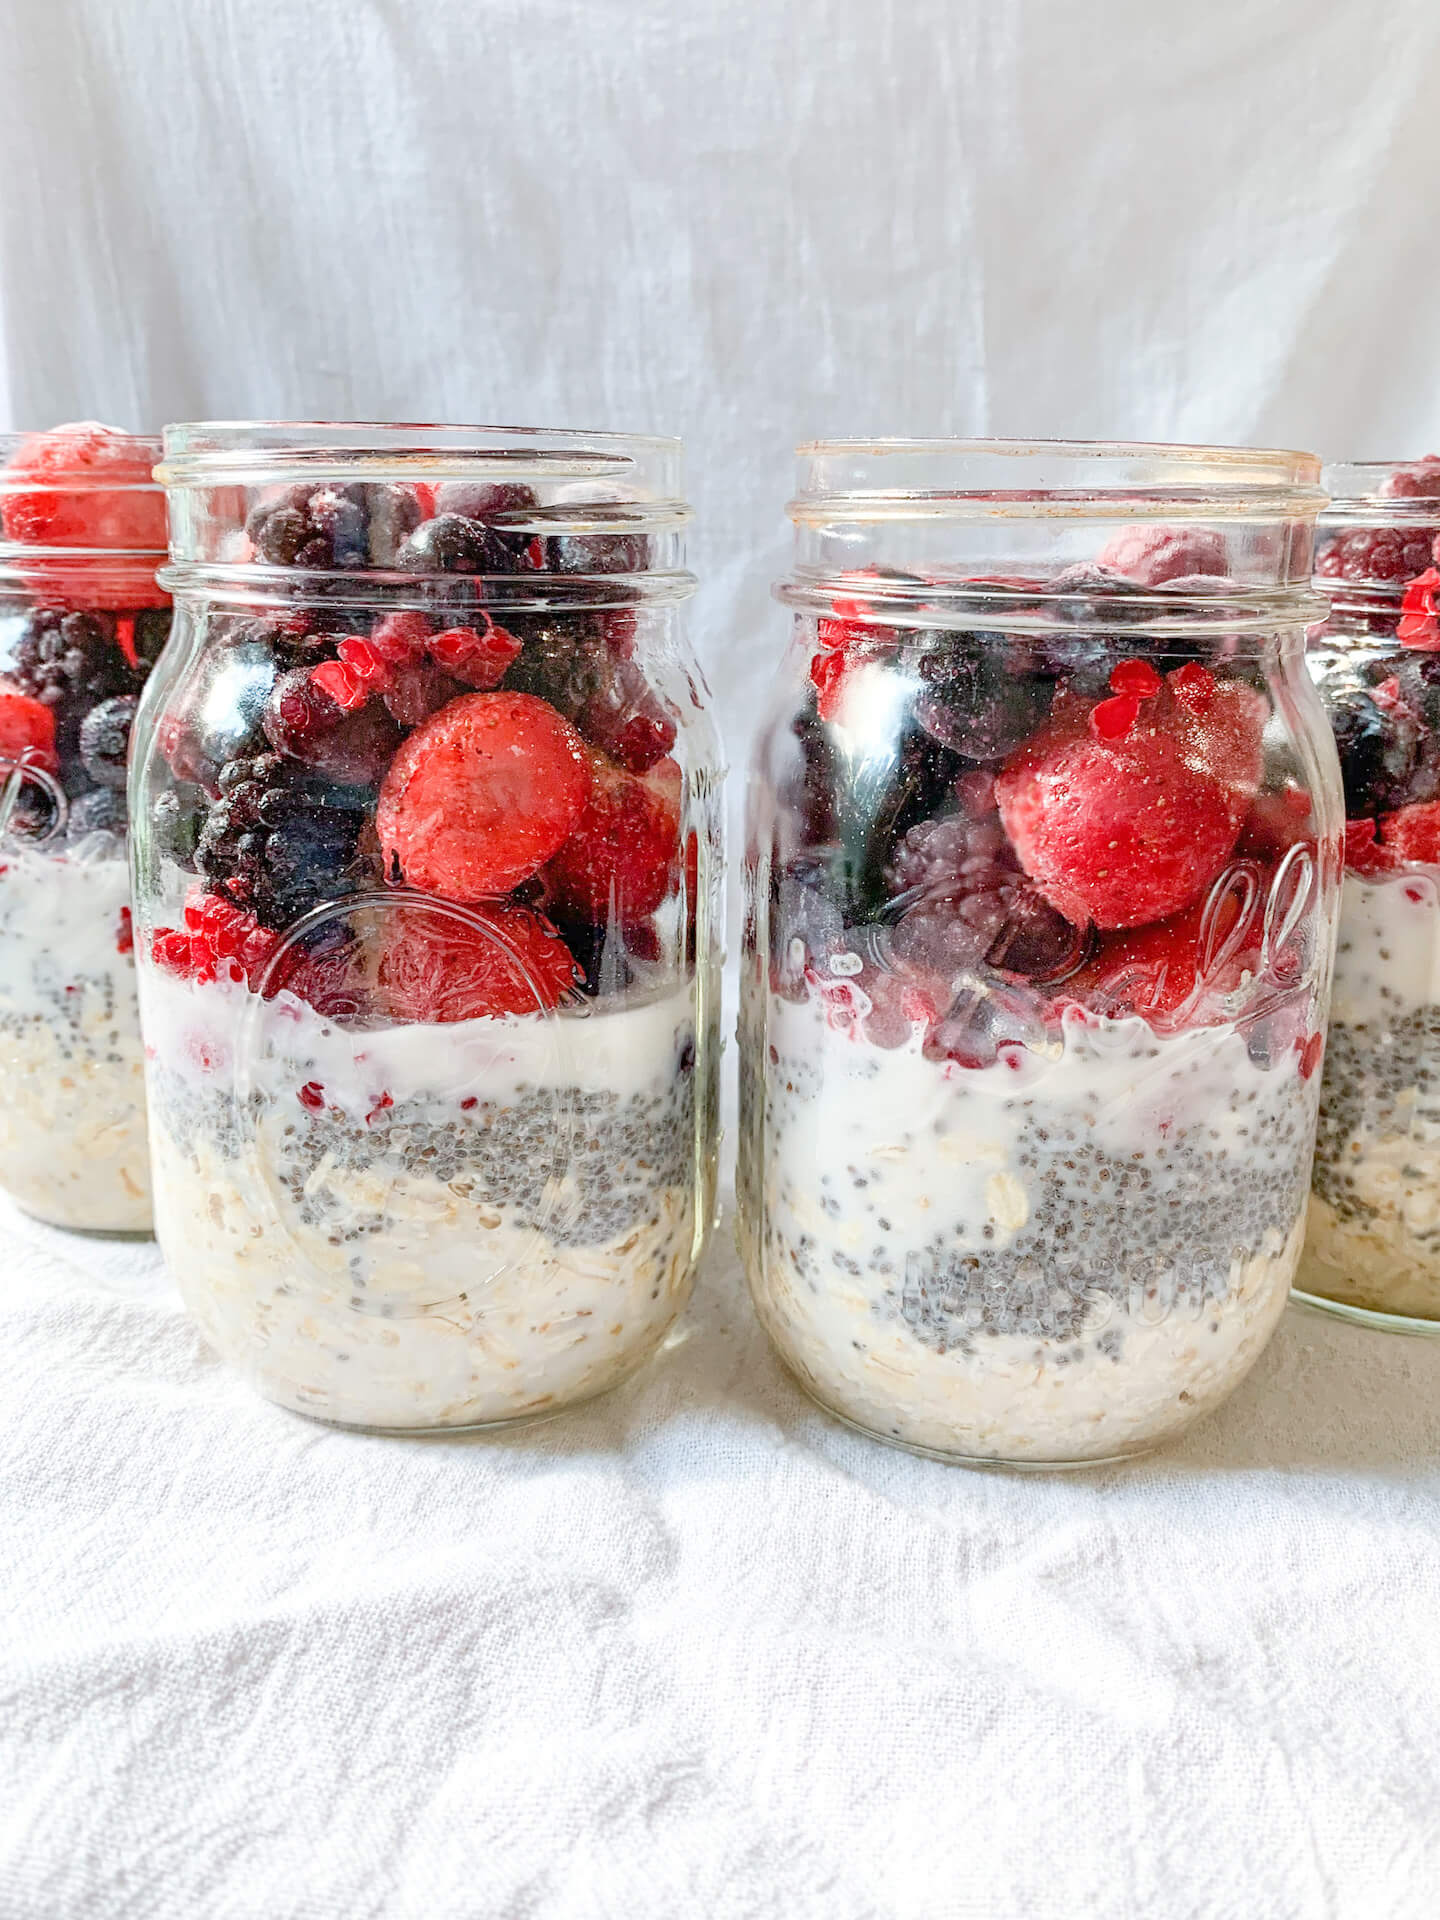 Overnight Oats with Chia Seeds